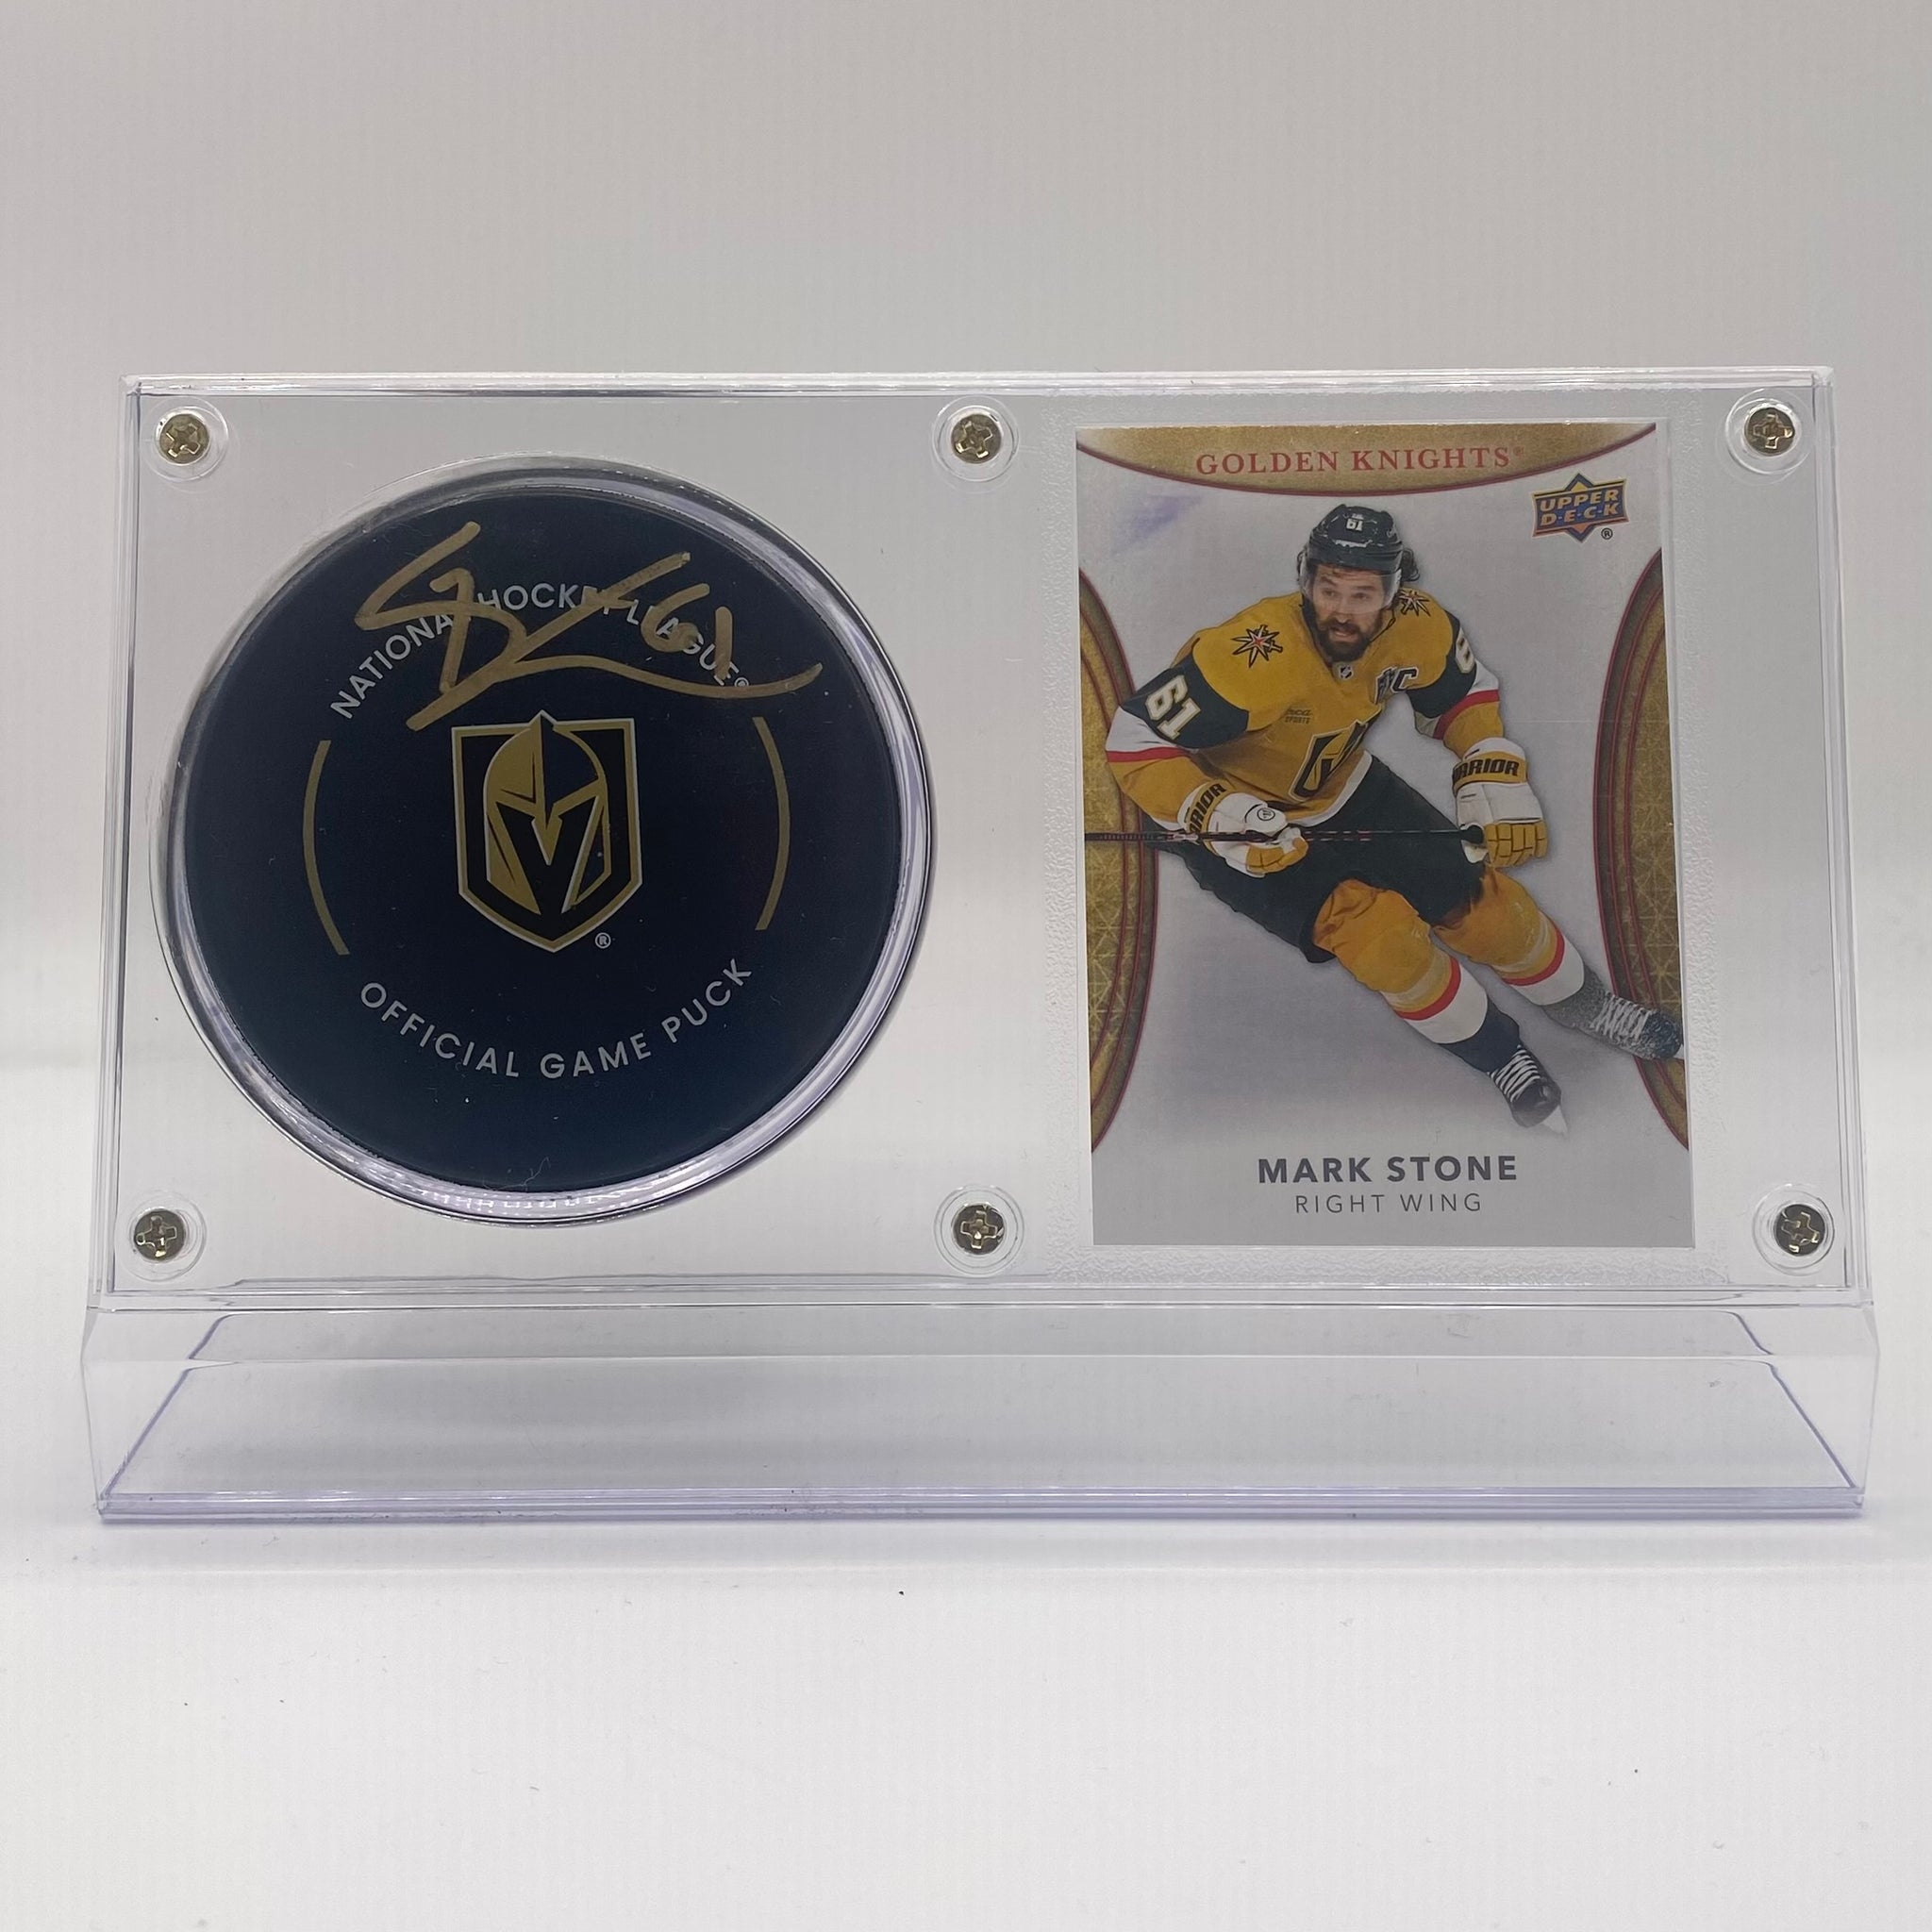 Mark Stone Vegas Golden Knights Autographed Hockey Puck and Trading Card Case